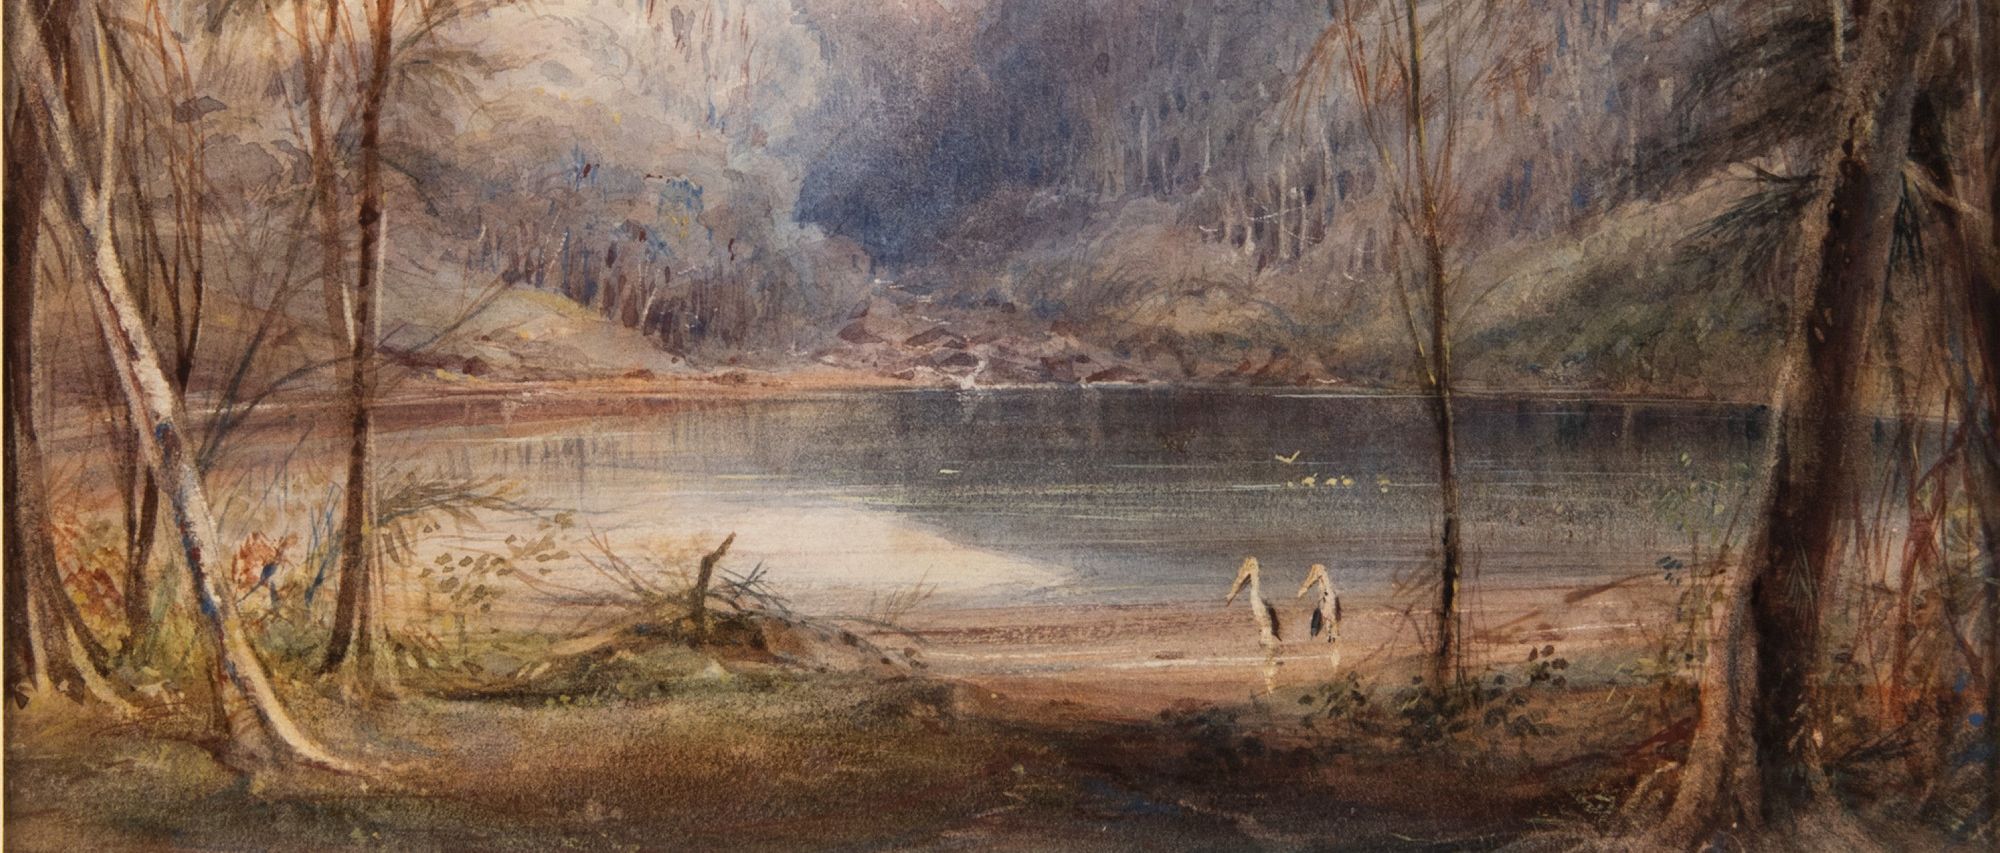 Painting of a small water basin in the bush with birds